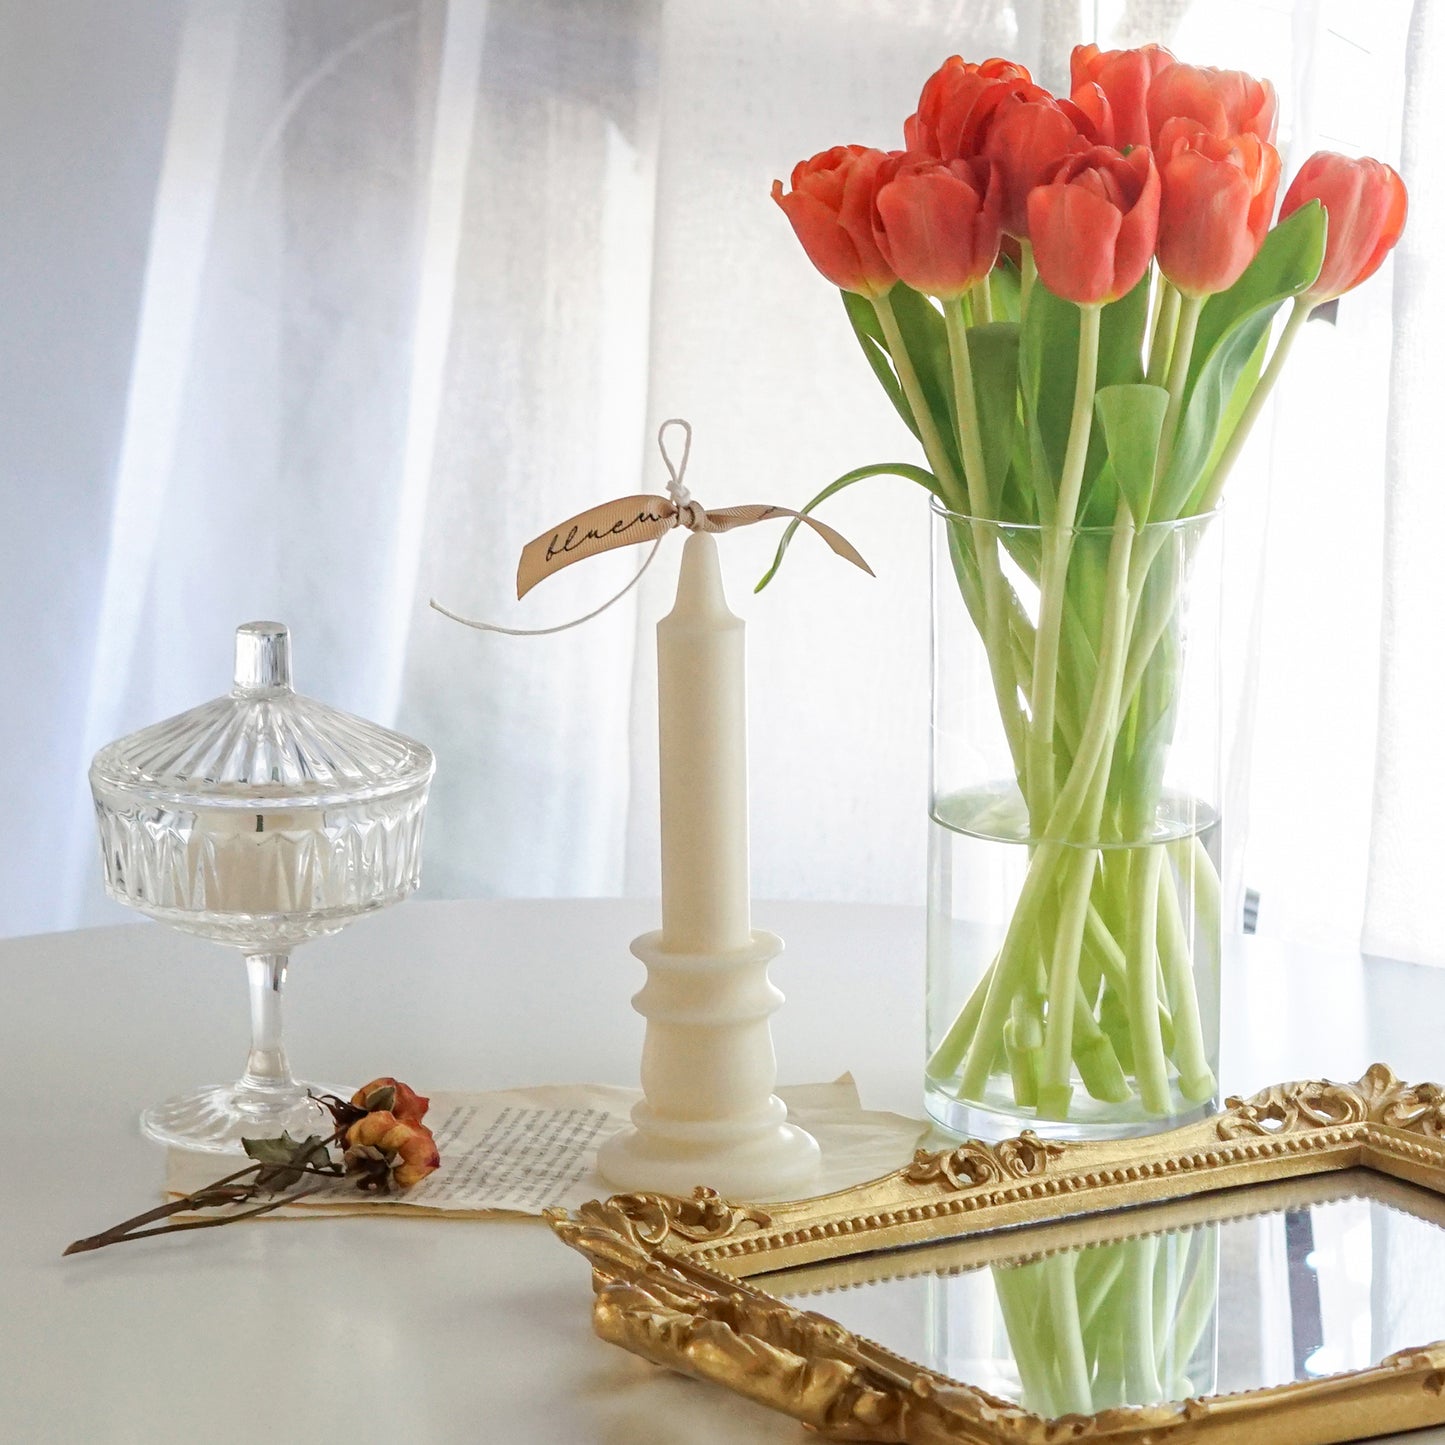 candlestick shape white soy pillar candle with beige bluewine studio ribbon, coupe glass and orange dried roses on book pages, rectangular gold french mirror tray, and orange tulips in a clear round vase on white round table